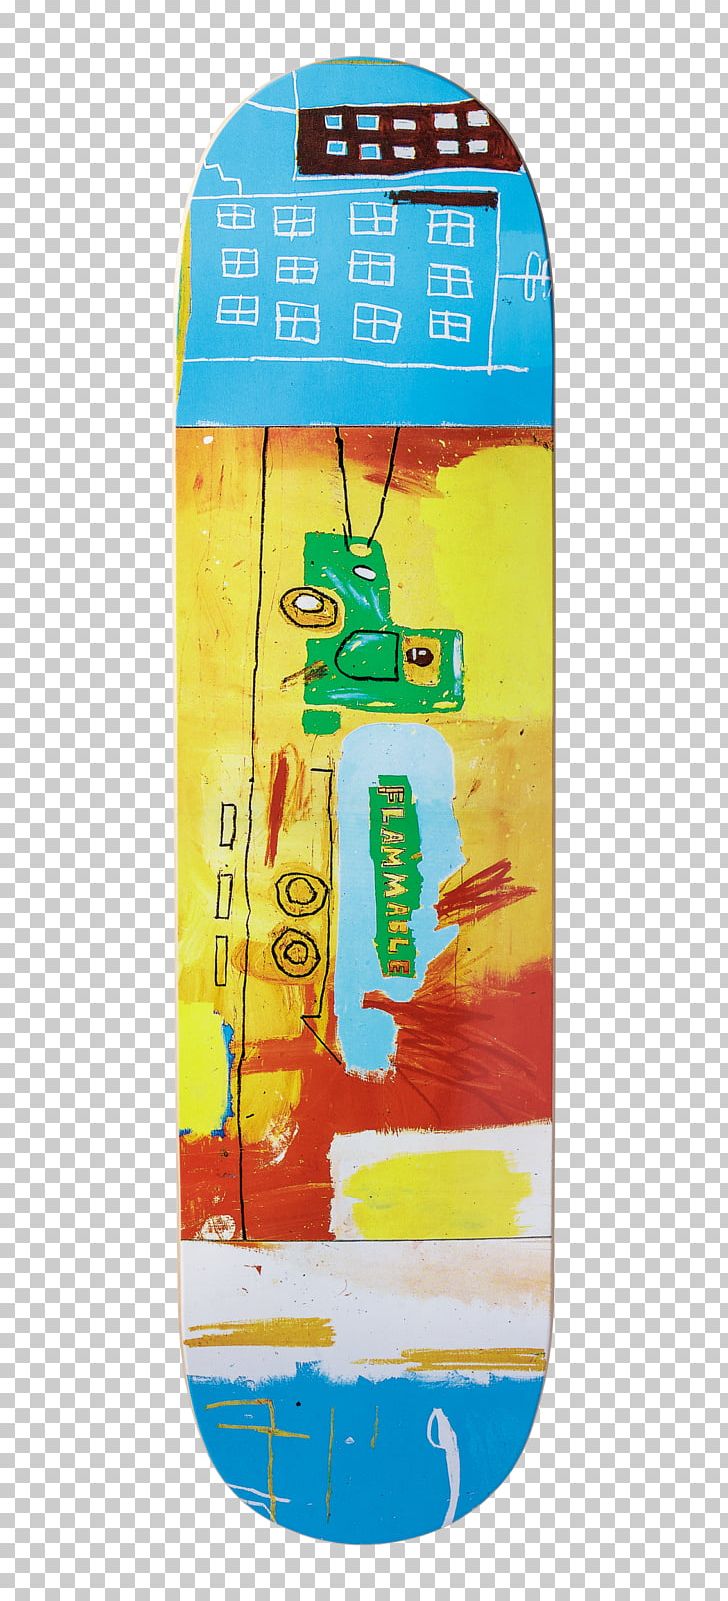 Trumpet Skateboard Artestar 380s Delivery PNG, Clipart, 380s, Collaboration, Delivery, Jeanmichel Basquiat, Jean Michel Basquiat Free PNG Download